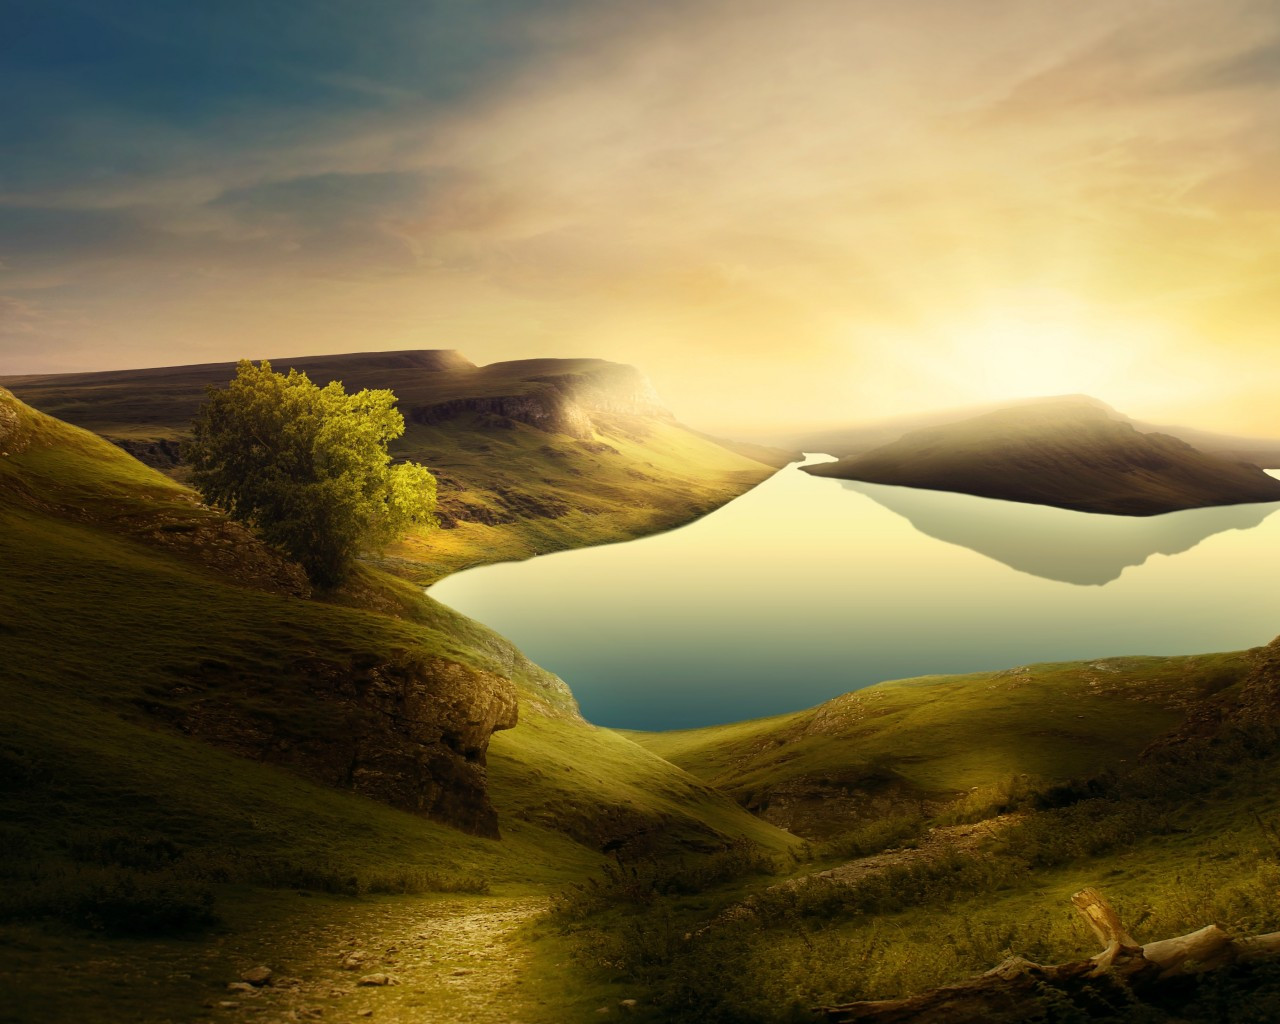 Download 1280x1024 Lake, Scenic, Mood, Relaxing, Sky, Sunset, Mountain, Hills Wallpaper